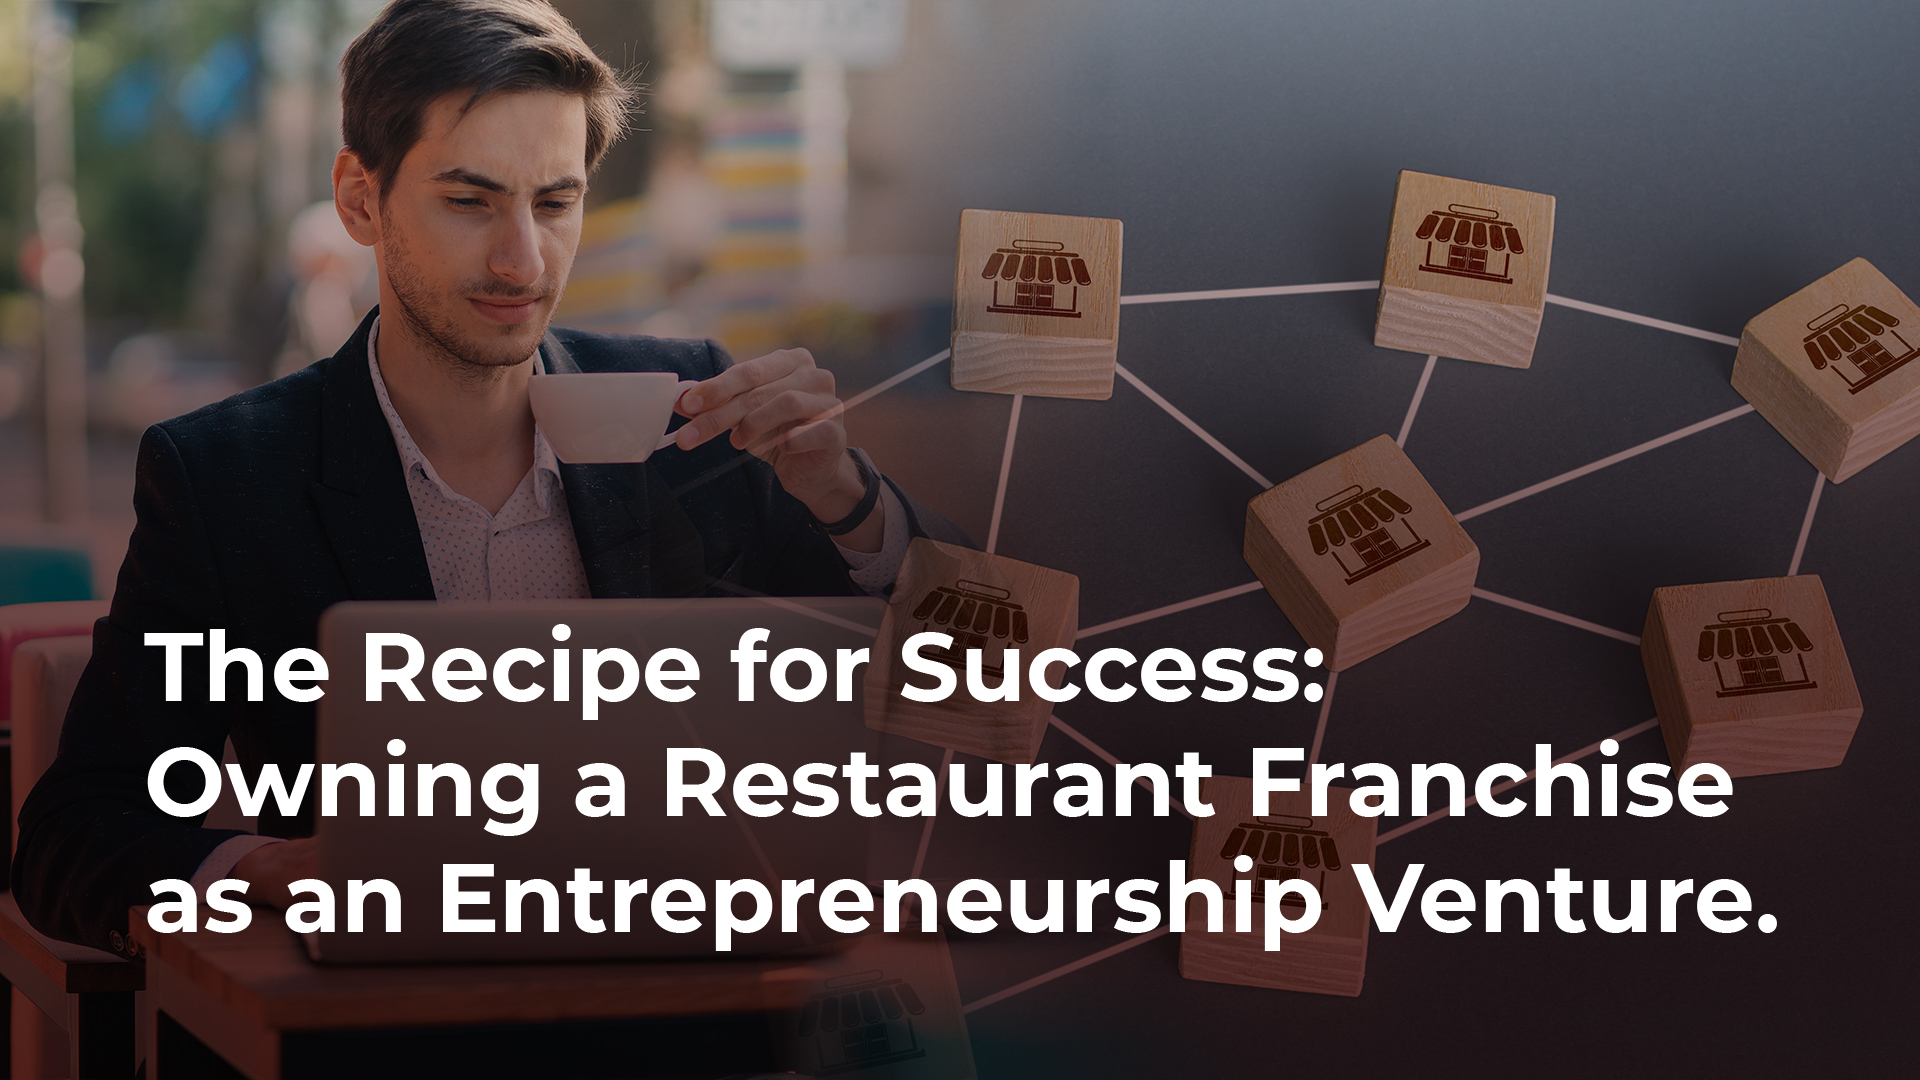 In this blog, we will discuss the recipe for success when it comes to owning a restaurant franchise as an entrepreneurship venture.